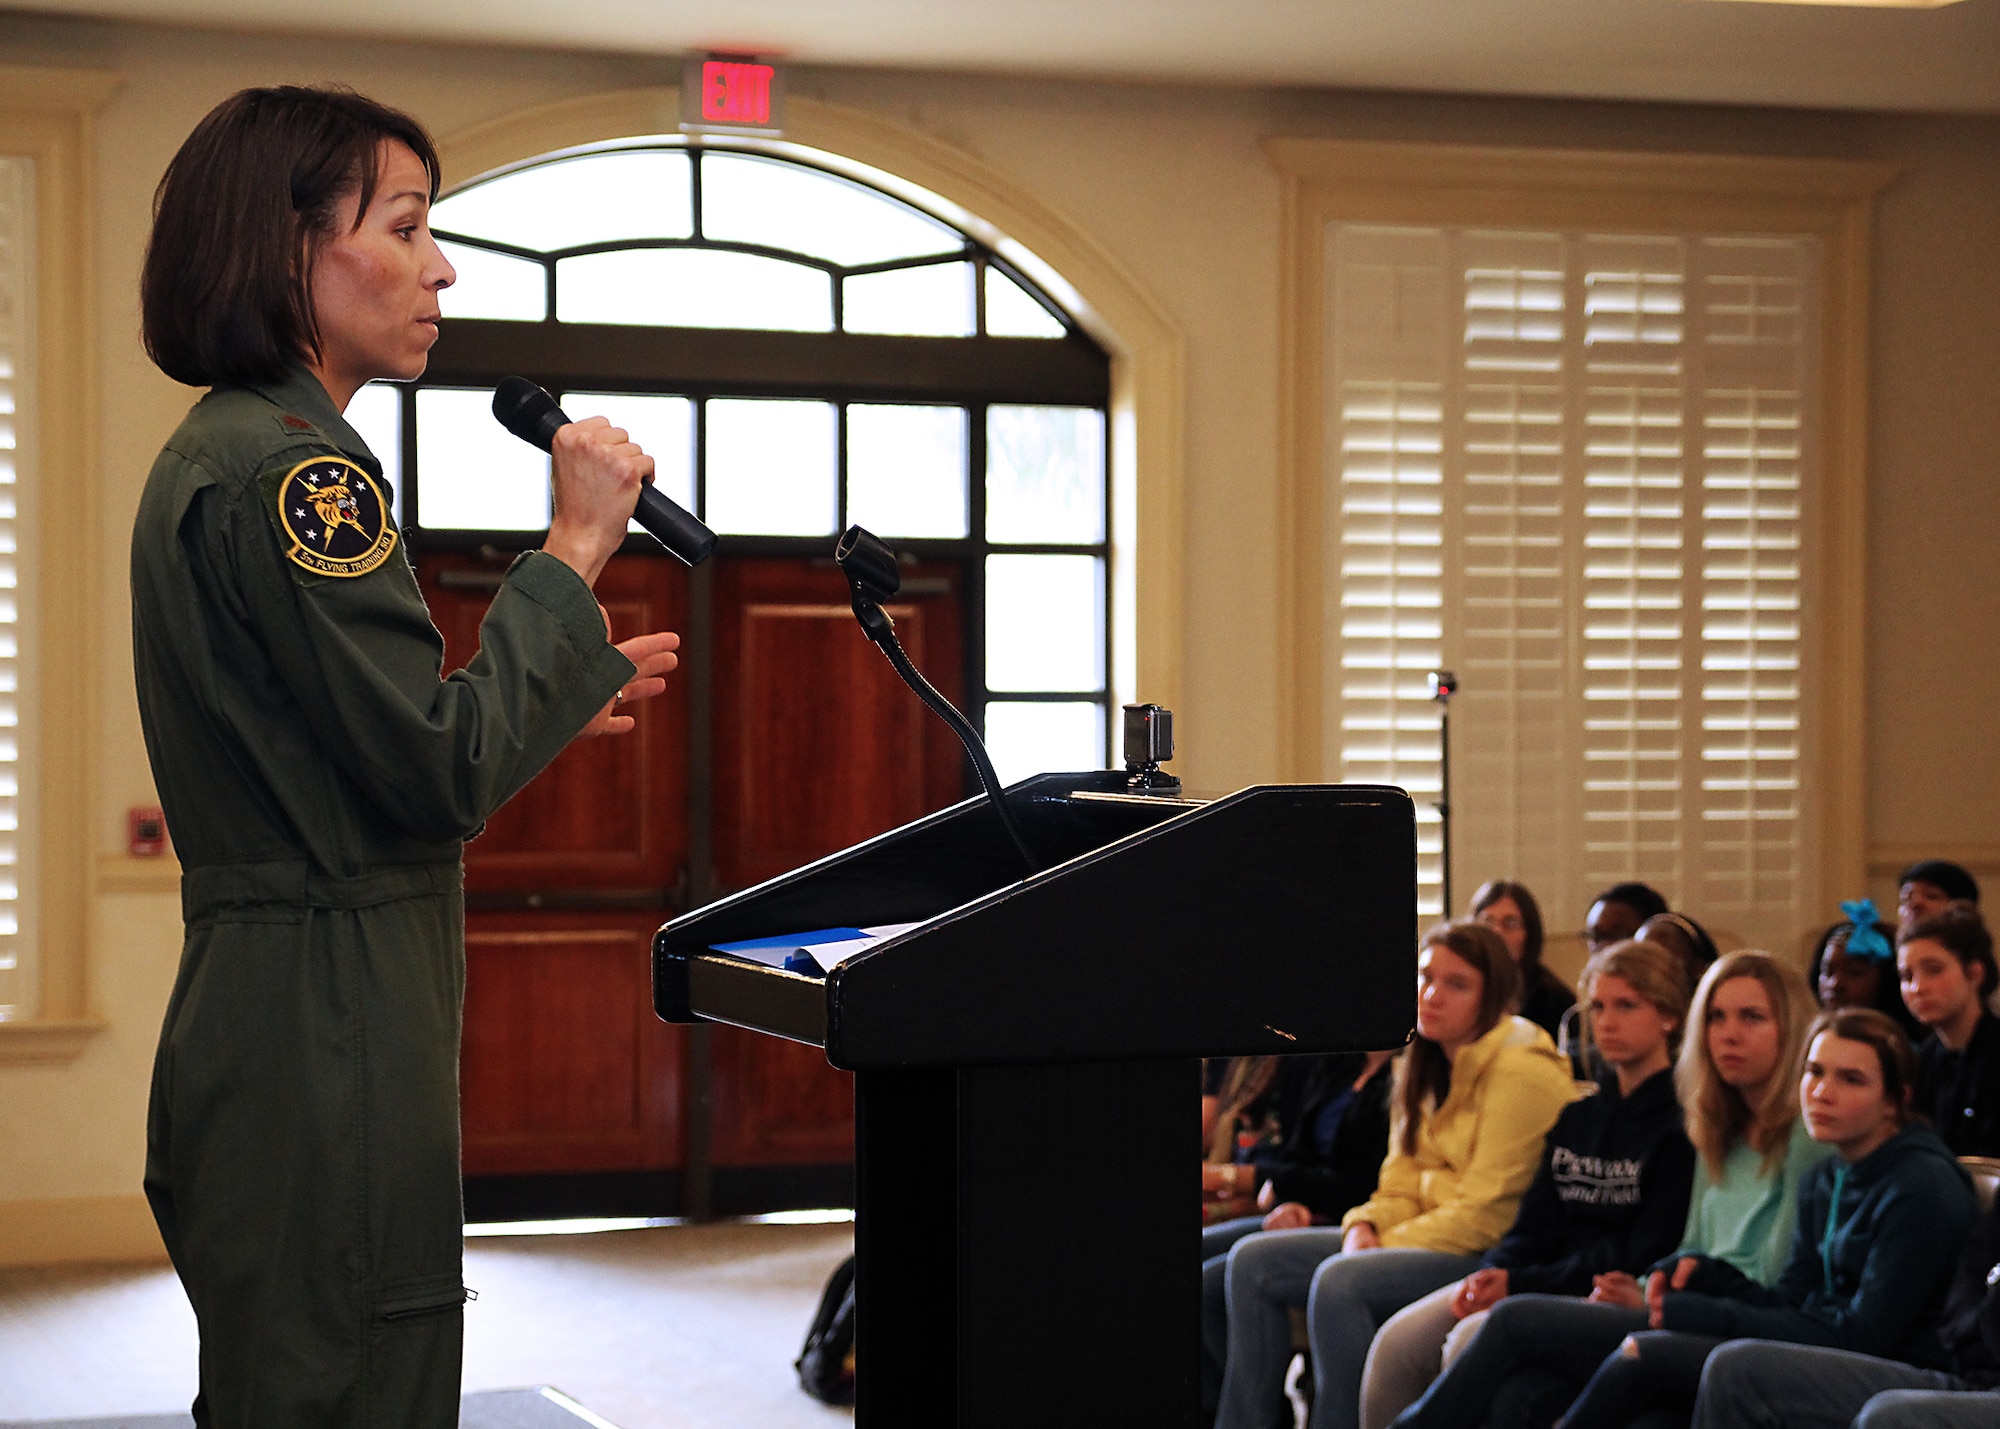 Maj. Christina "Thumper" Hopper, from the 71st Flying Training Wing at Vance Air Force Base, Oklahoma, speaks to Charleston area high school girls at the 8th Annual Joint Base Charleston Women in Aviation Career Day. Hopper was the first African-American female fighter pilot to fly combat missions during a major war. She shared stories of her overcoming adversity and challenges early in her life, and challenged the girls to be anything they want to be. (U.S. Air Force Photo / Michael Dukes)